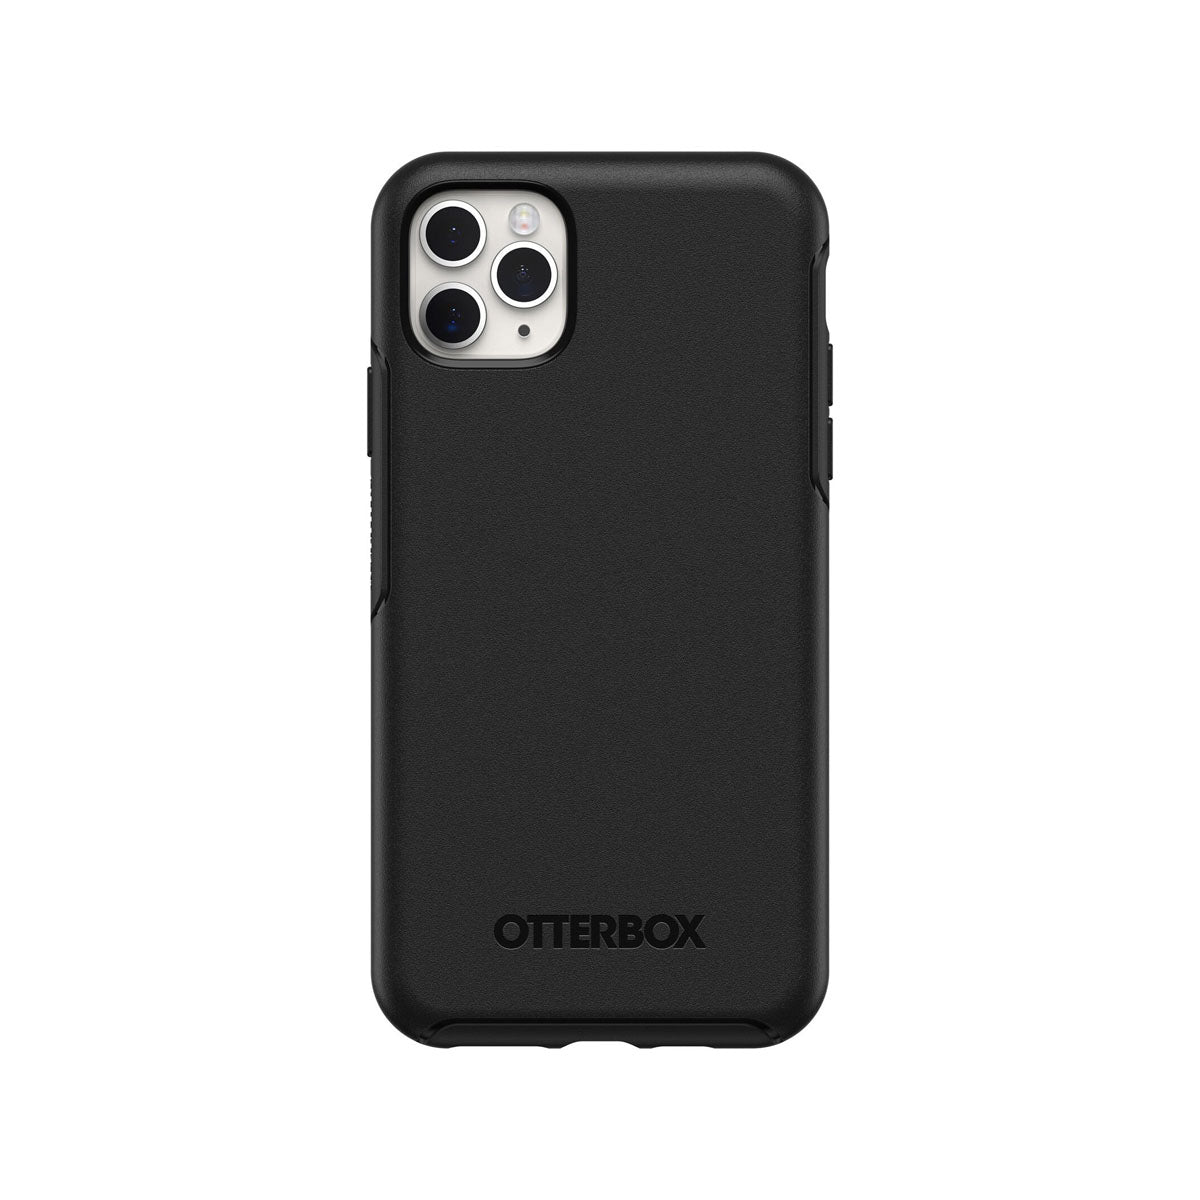 OtterBox Symmetry Series Phone Case for iPhone 11 Pro Max - Black.